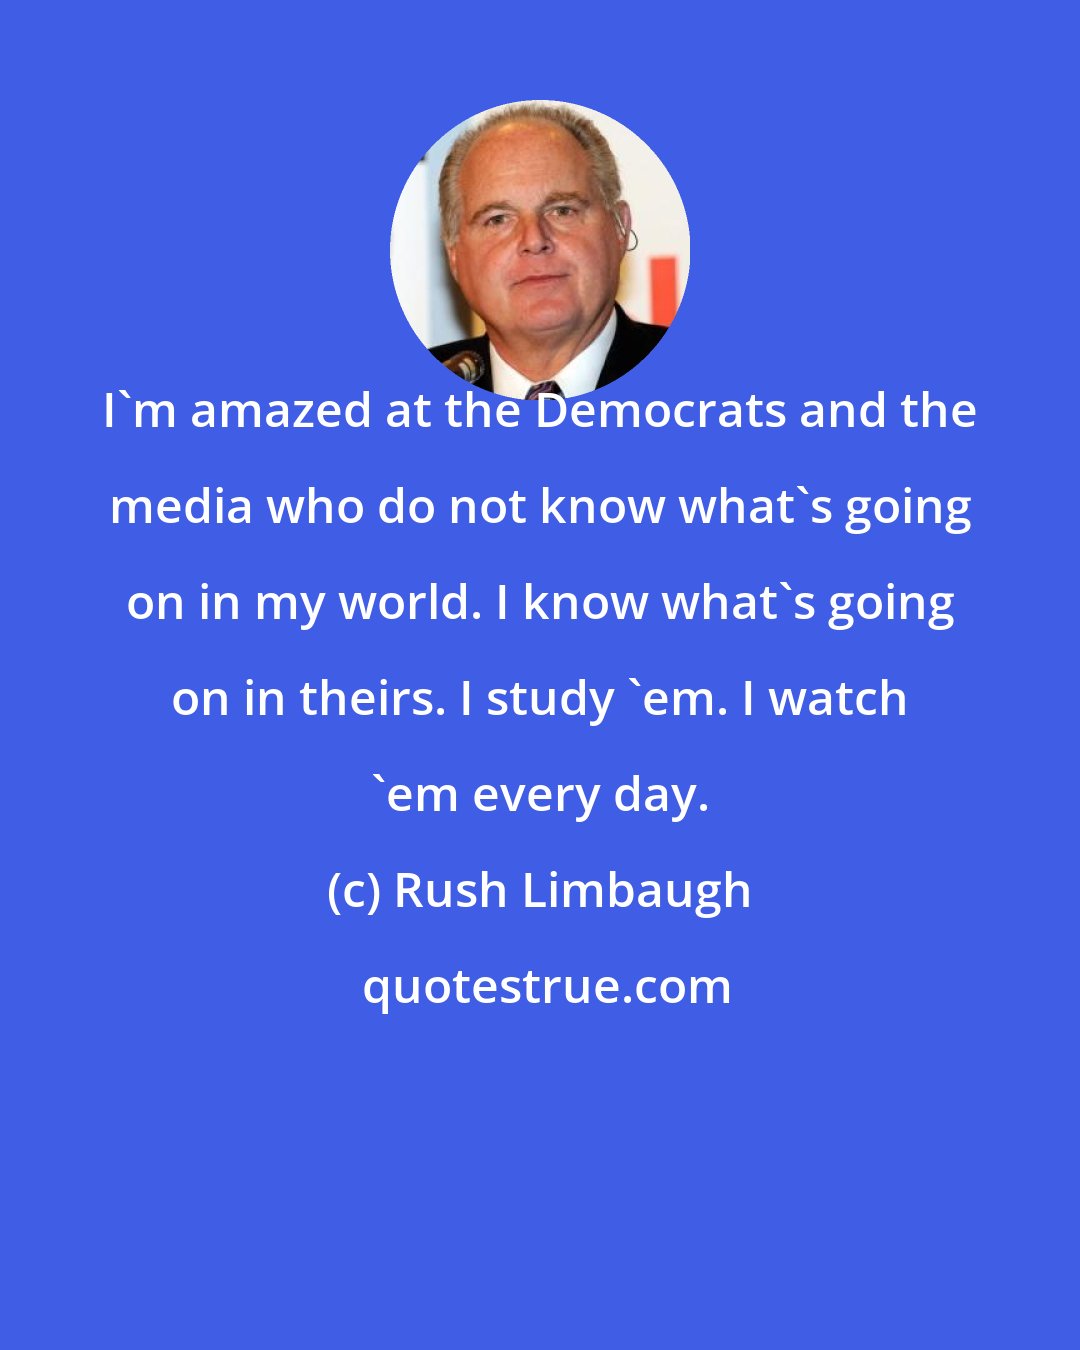 Rush Limbaugh: I'm amazed at the Democrats and the media who do not know what's going on in my world. I know what's going on in theirs. I study 'em. I watch 'em every day.